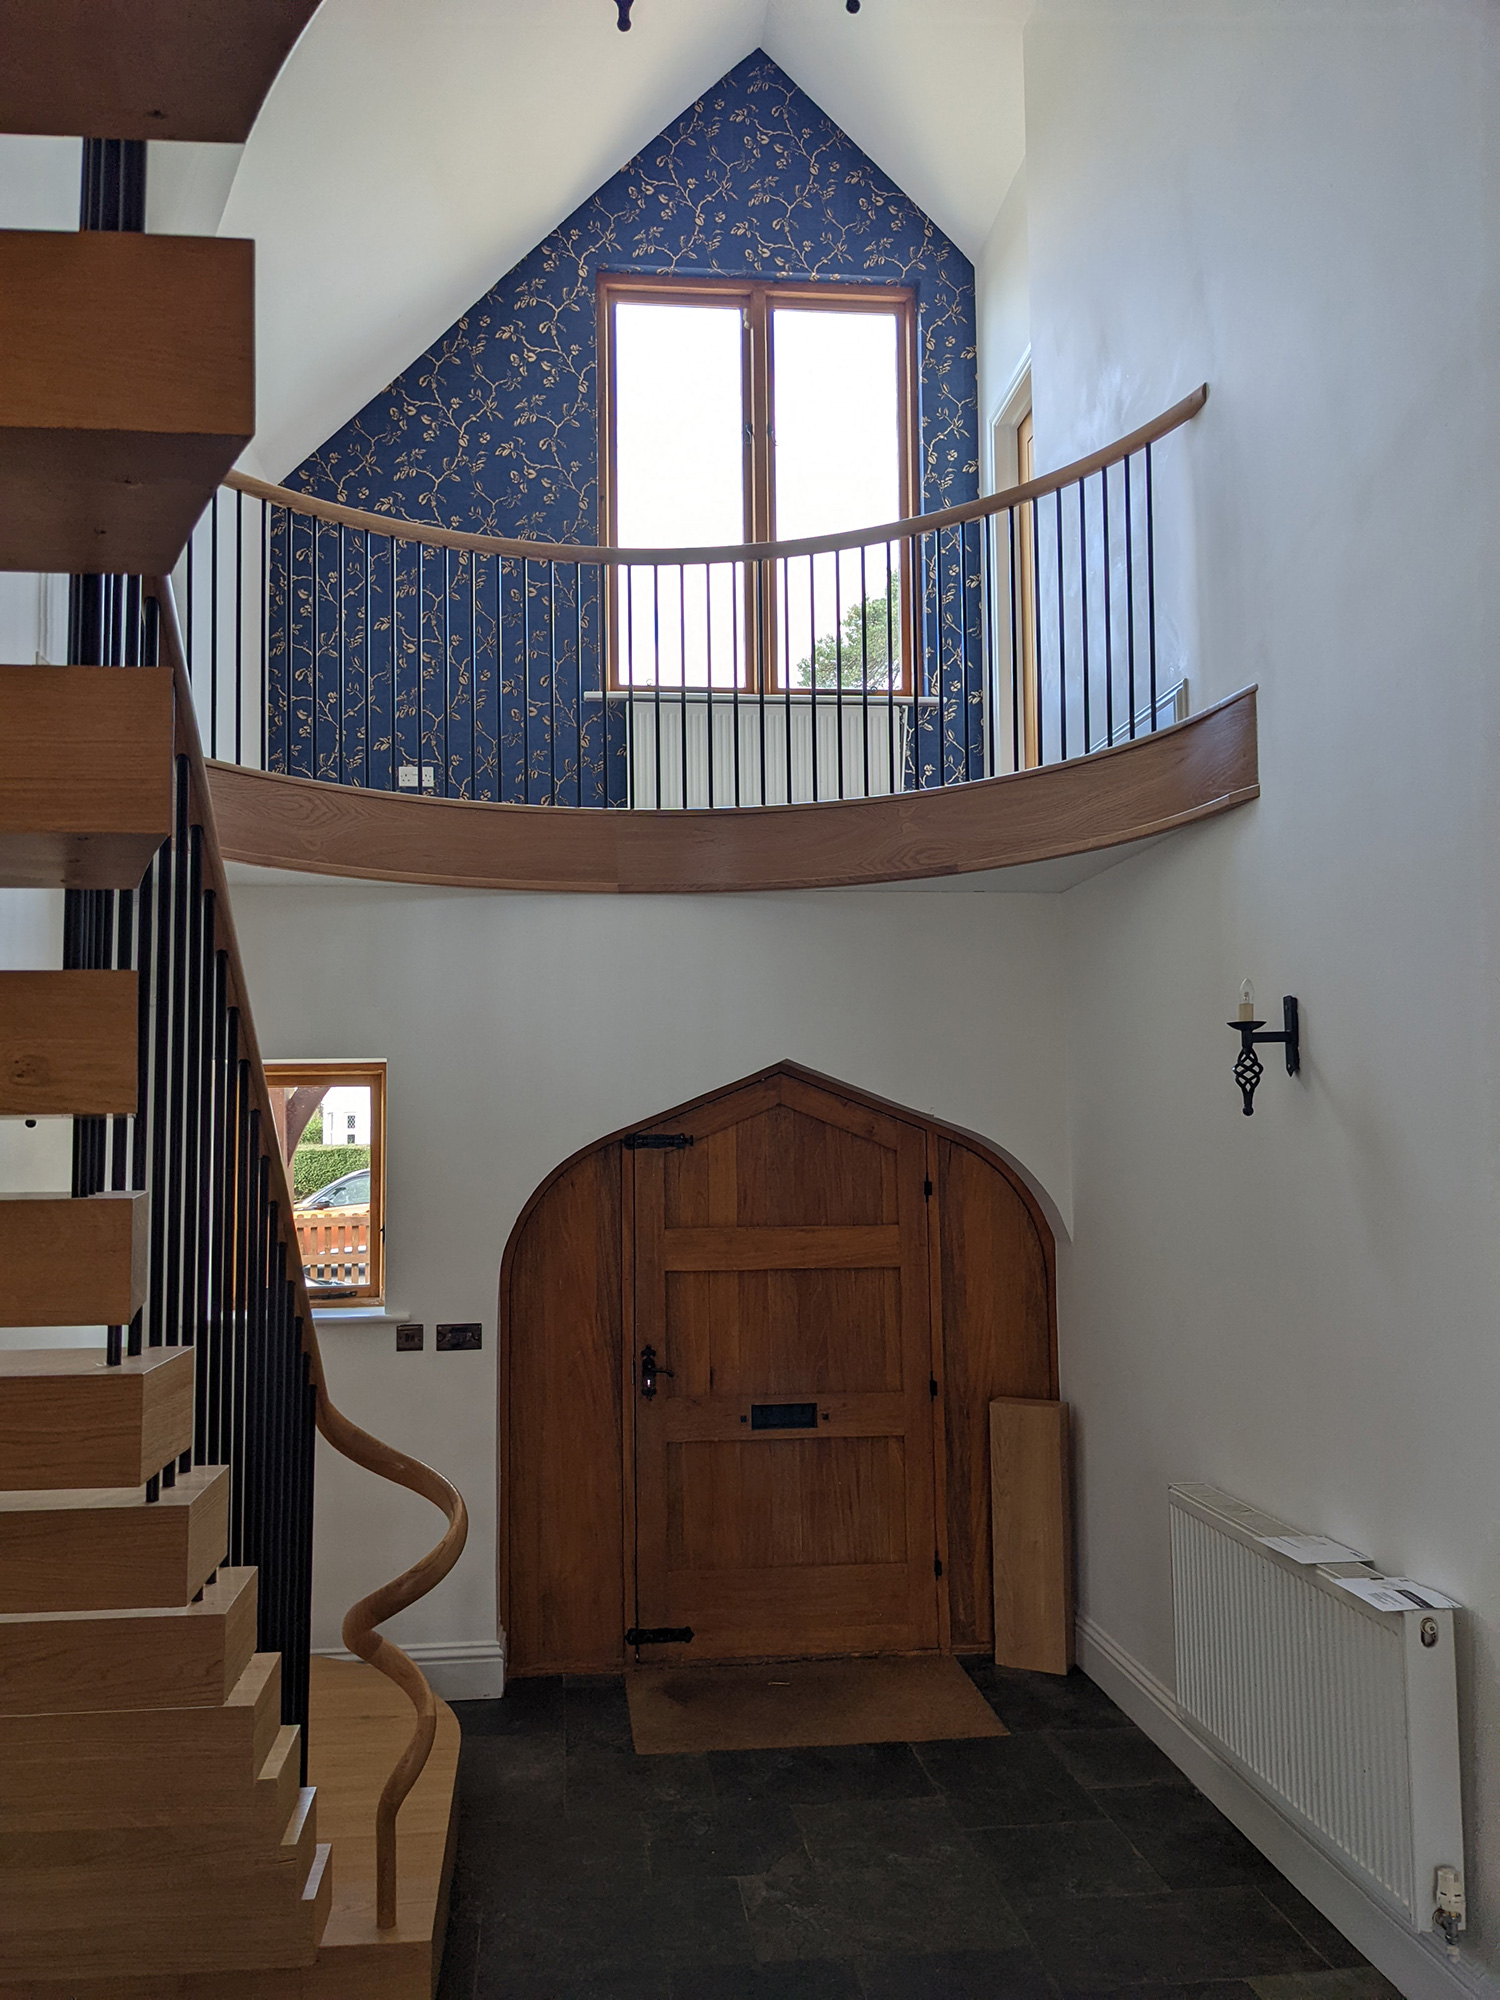 A photo of the hallway showing the oak staircase and white walls.